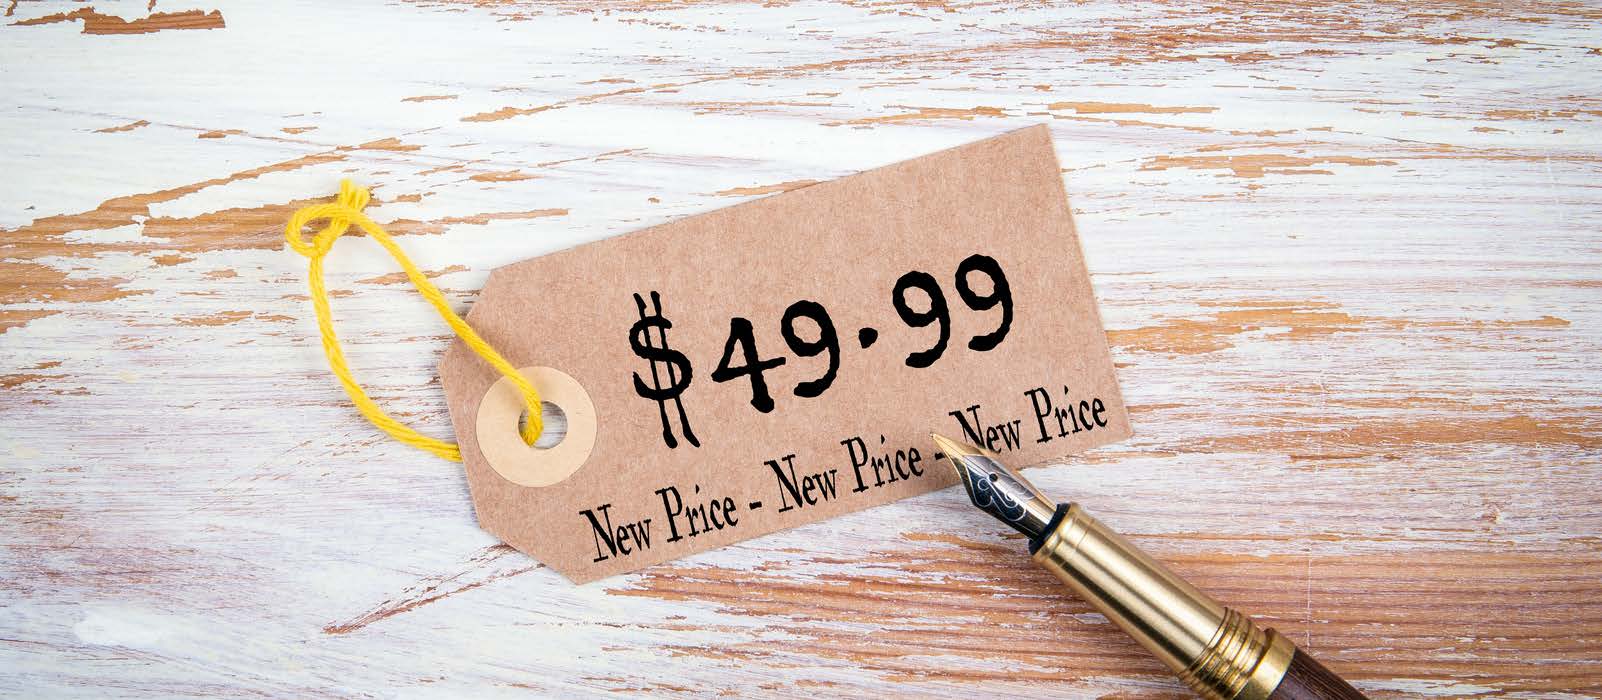 Price tag reading $49.99 and New Price three times, yellow string, fountain pen